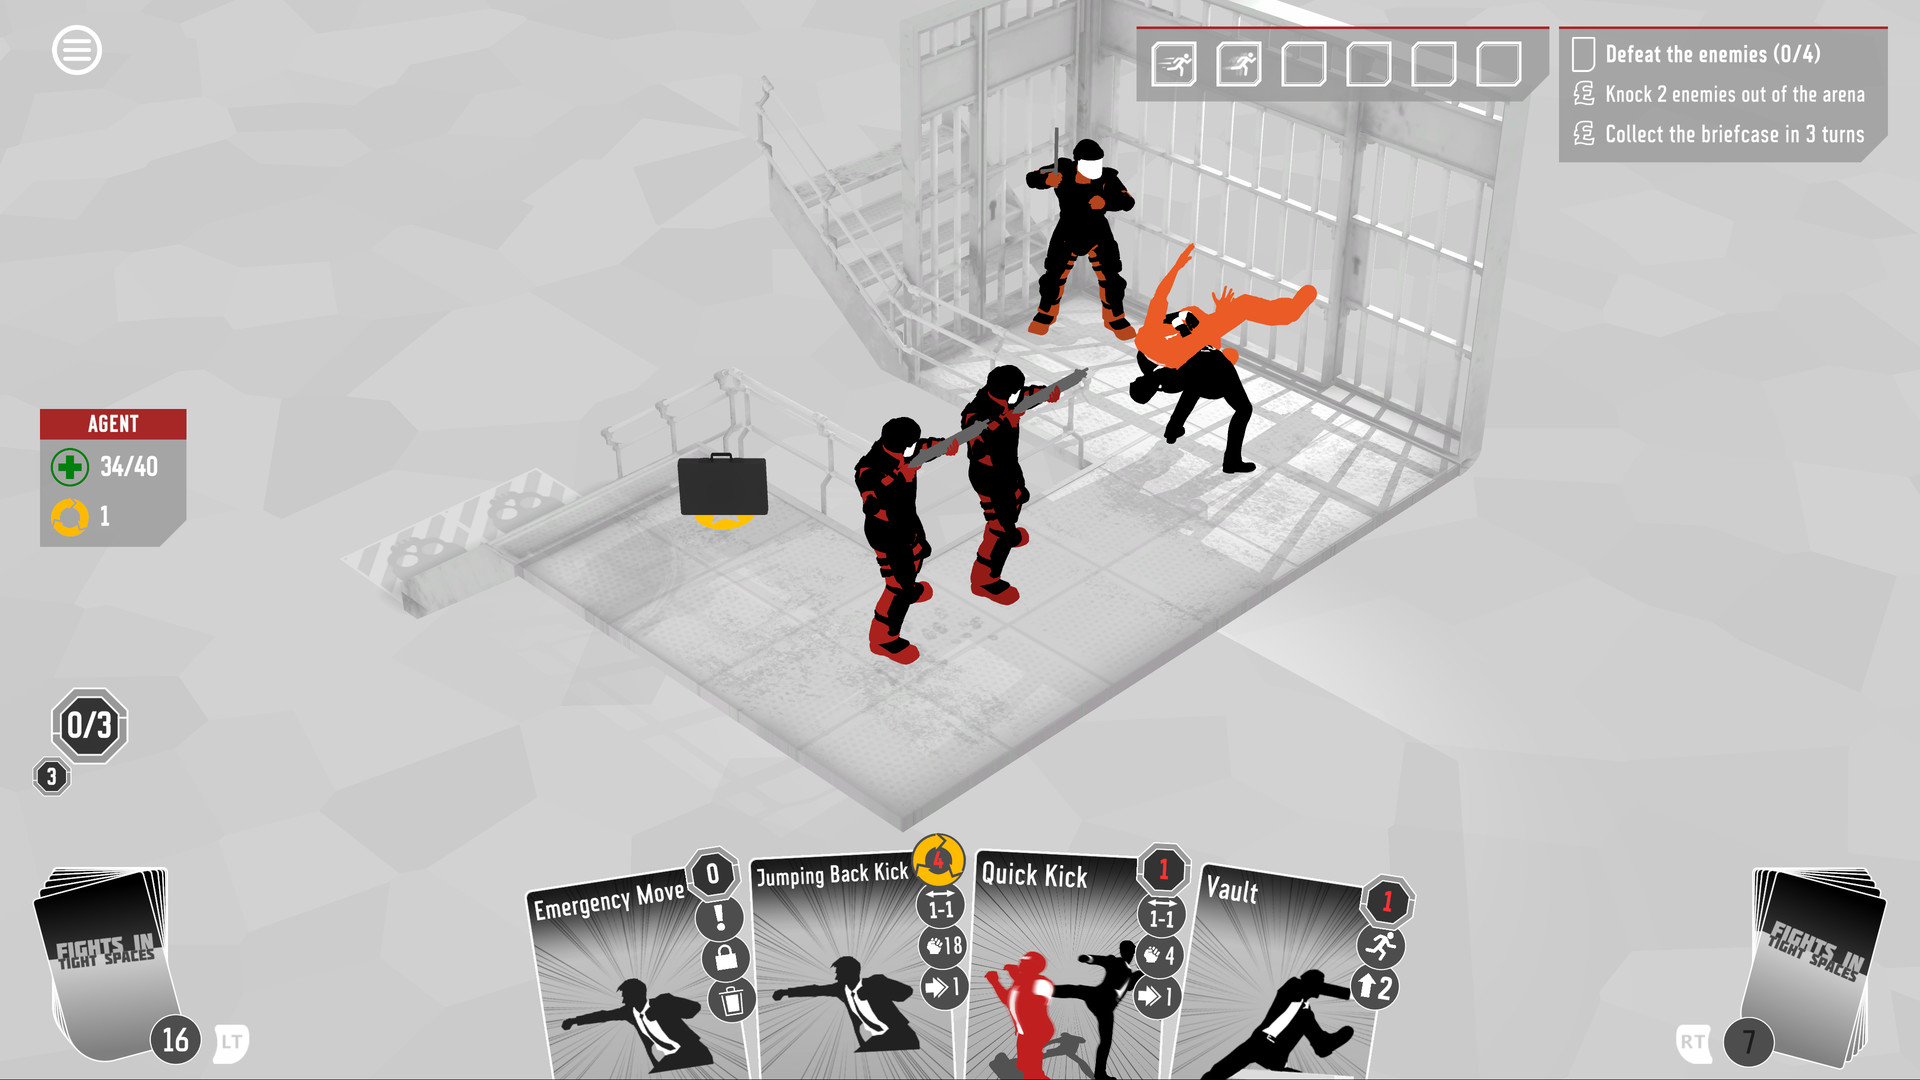 Skibidi fight игра. ФАЙТЫ игра компьютерные. Гигук игра. Lethal Running: Prologue. Off the game Fight.